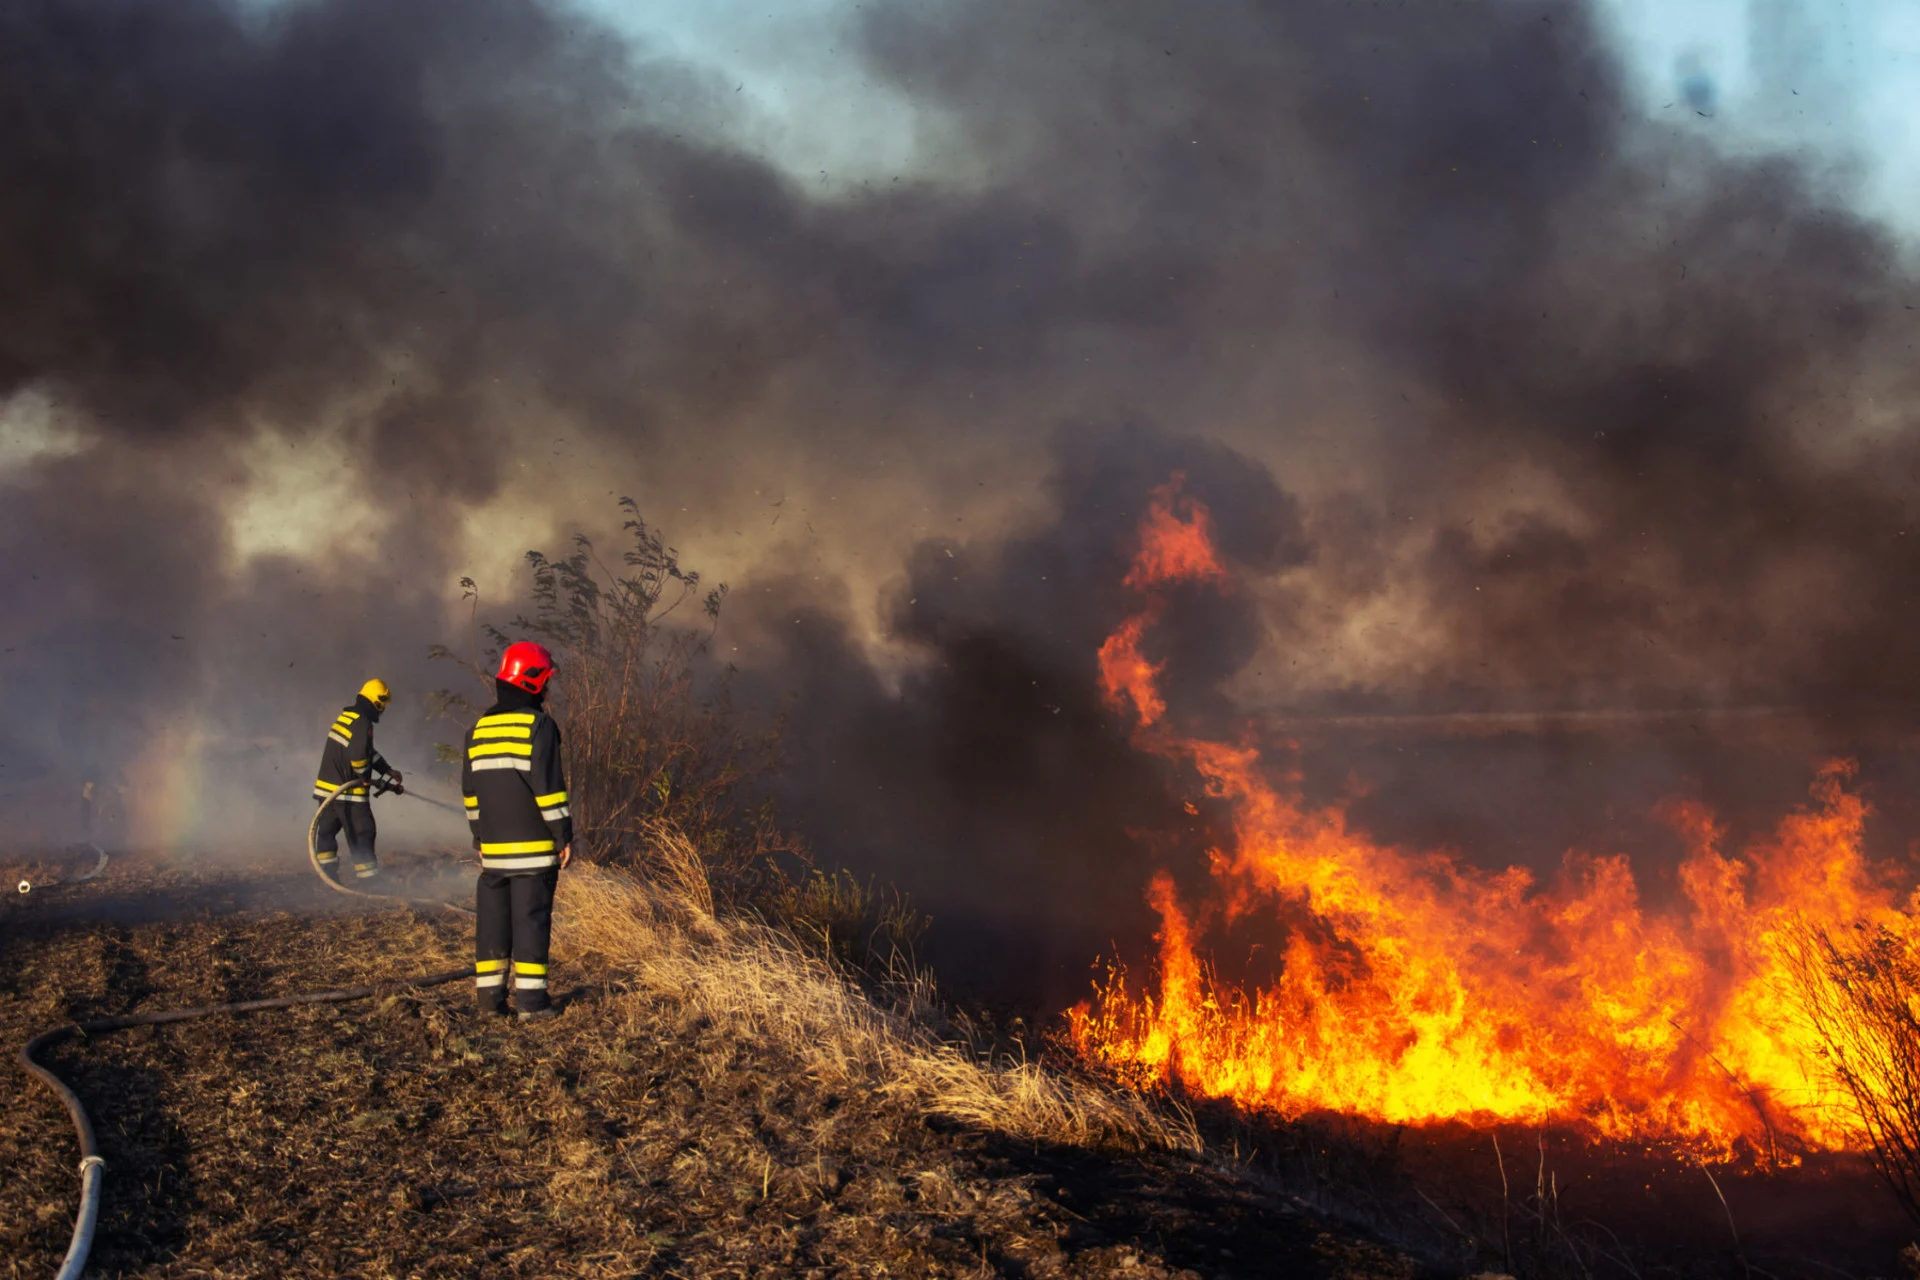 50 per cent increase in catastrophic wildfires possible by 2100, report warns